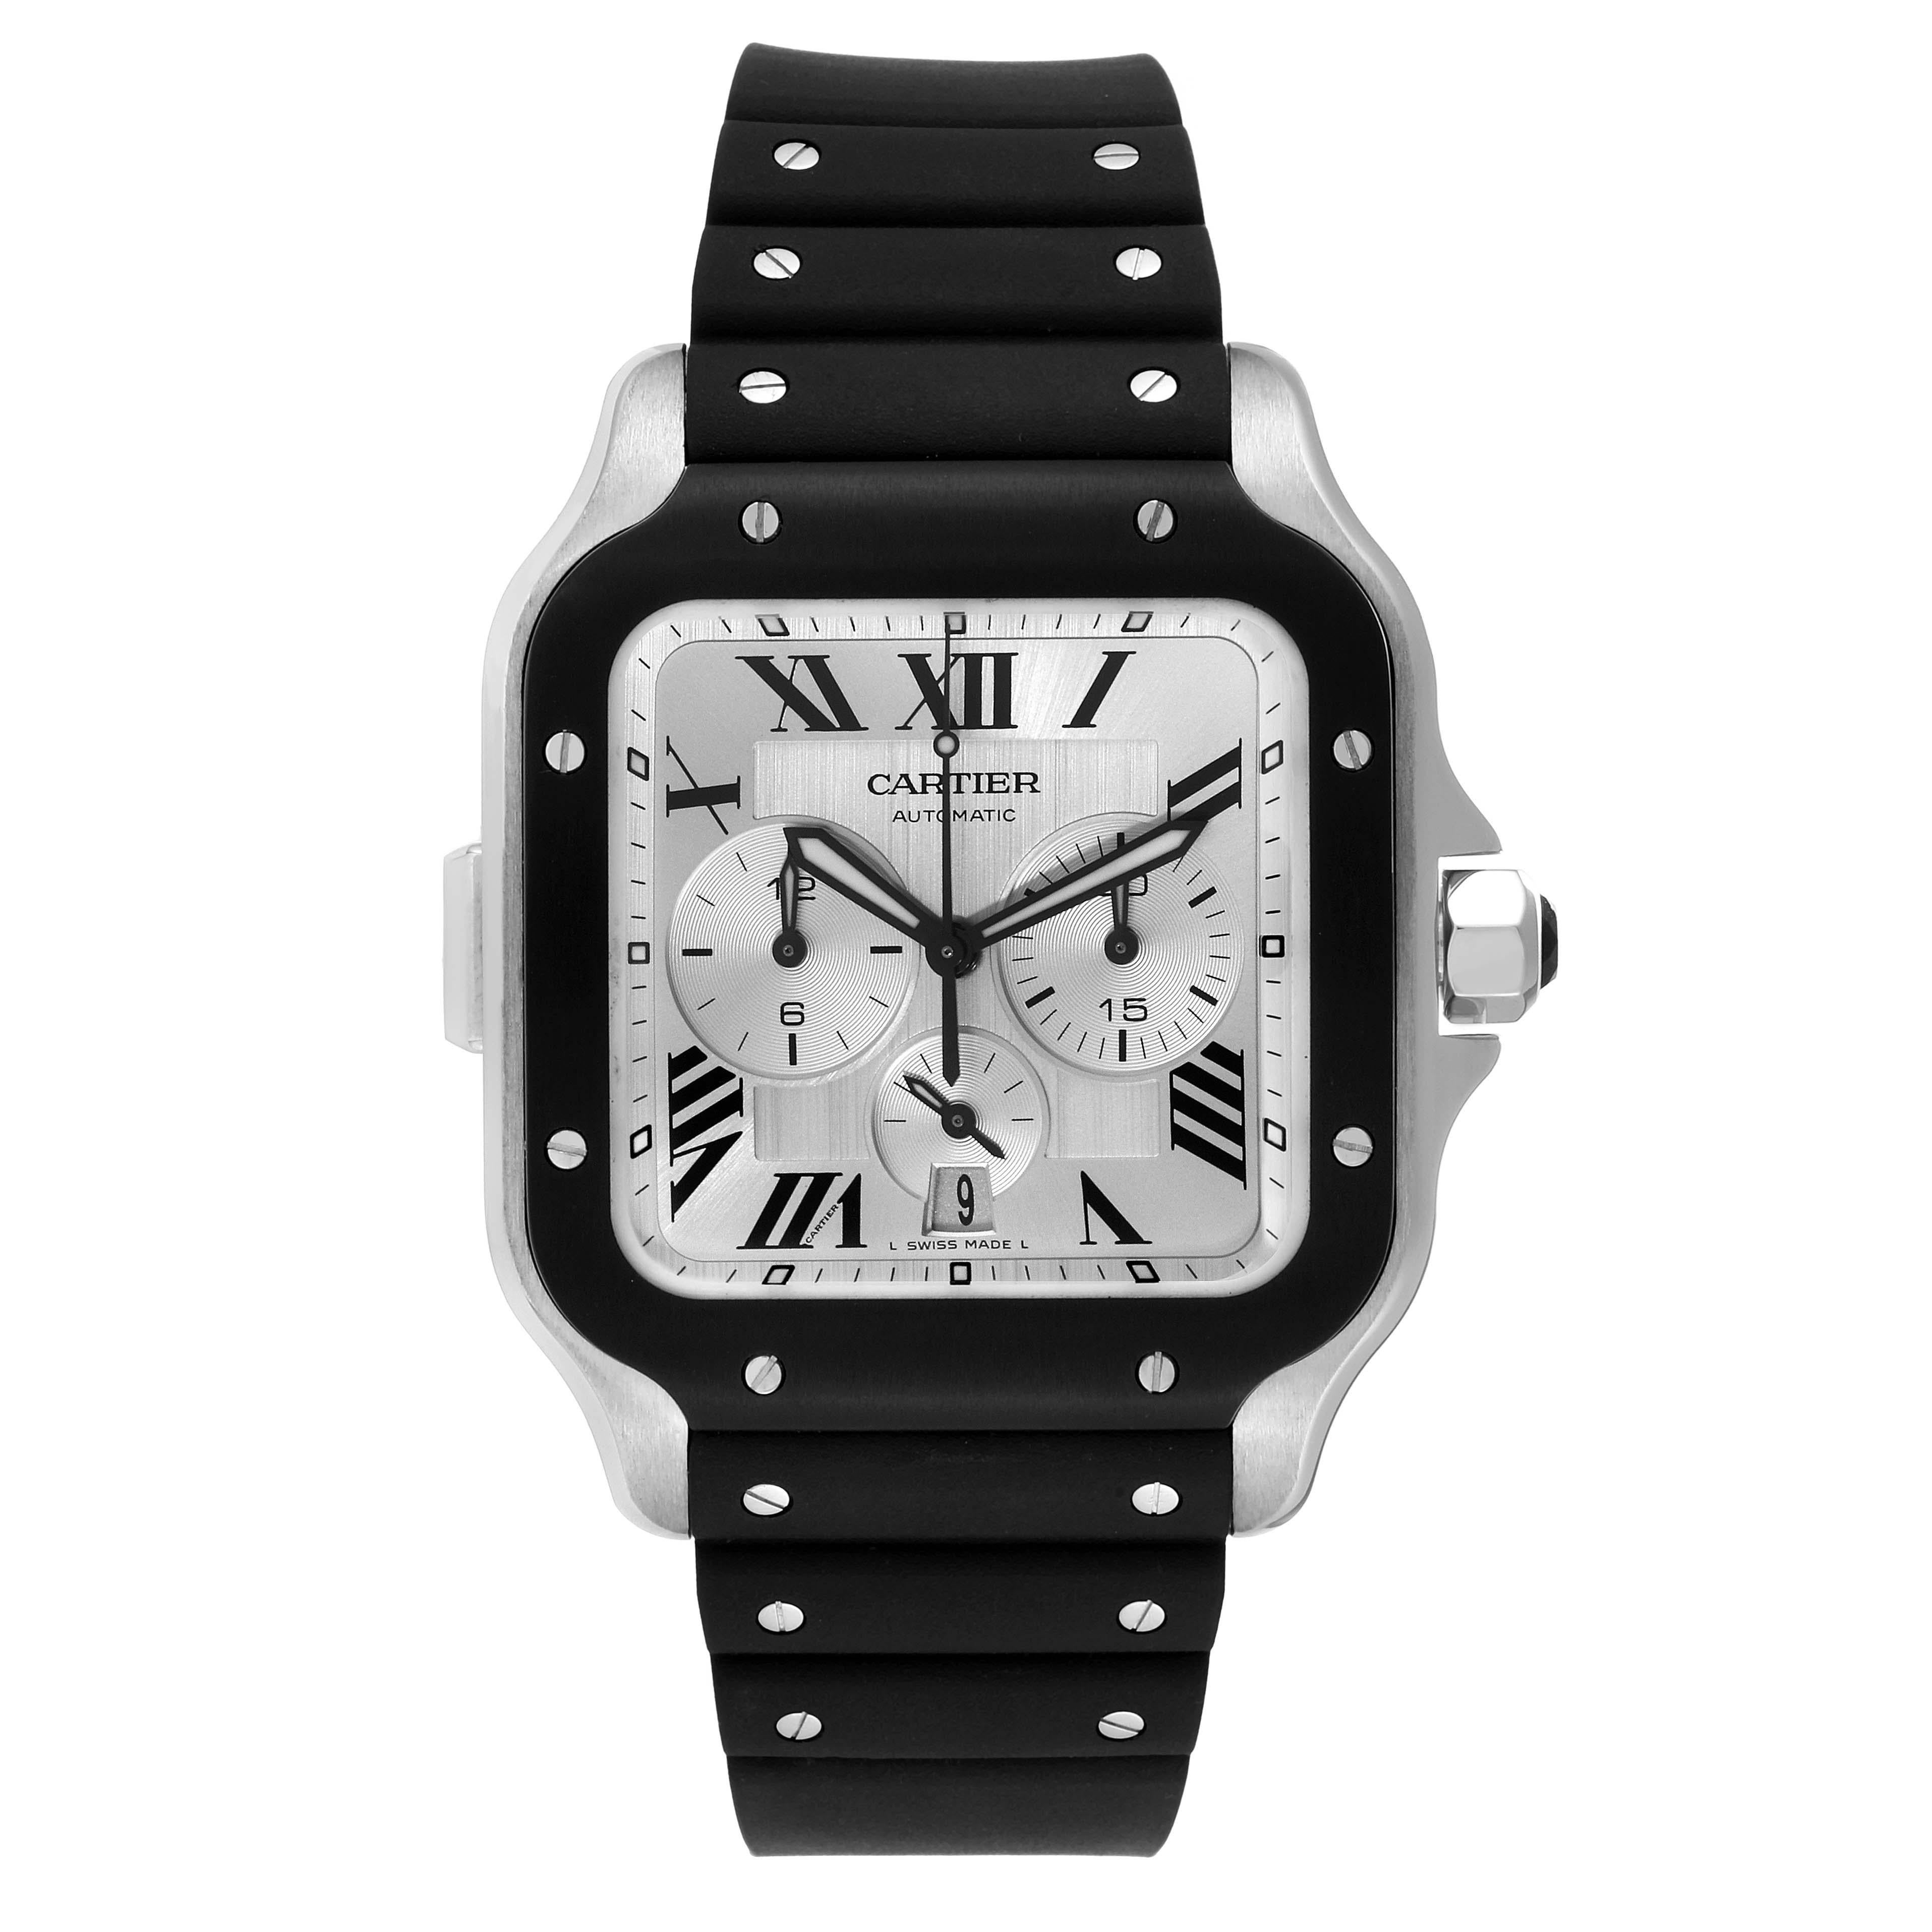 Cartier Santos XL Chronograph Steel ADLC Mens Watch WSSA0017 Card. Automatic self-winding chronograph movement. Stainless steel case 43.3 mm wide. Protected 7-sided crown set with a faceted black spinel. One chronograph pusher at 9 o'clock, with a